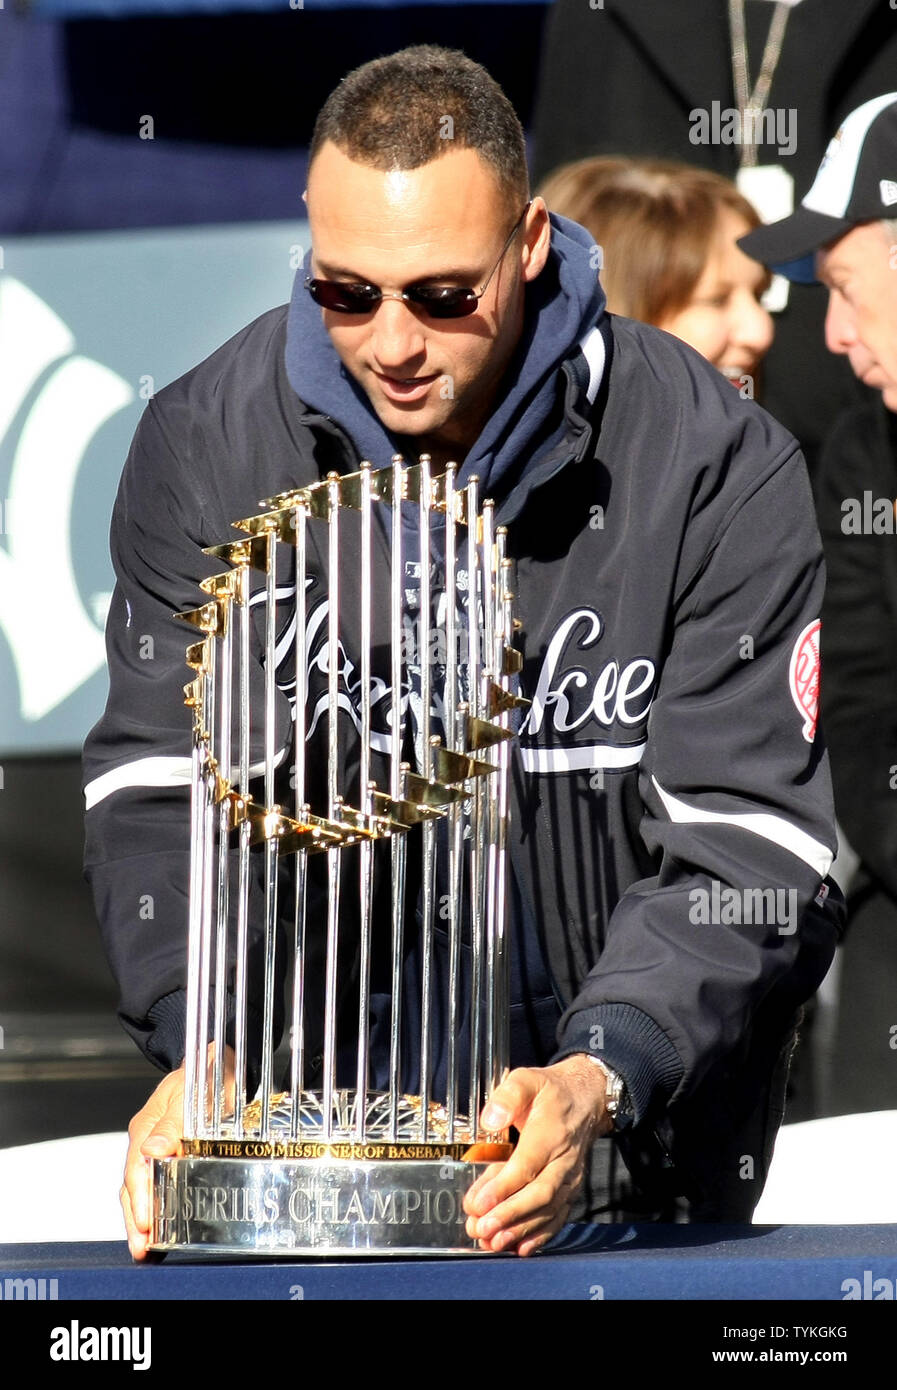 Derek Jeter With 2009 World Series Trophy New York Yankees LIMITED STOCK  8X10 Photo